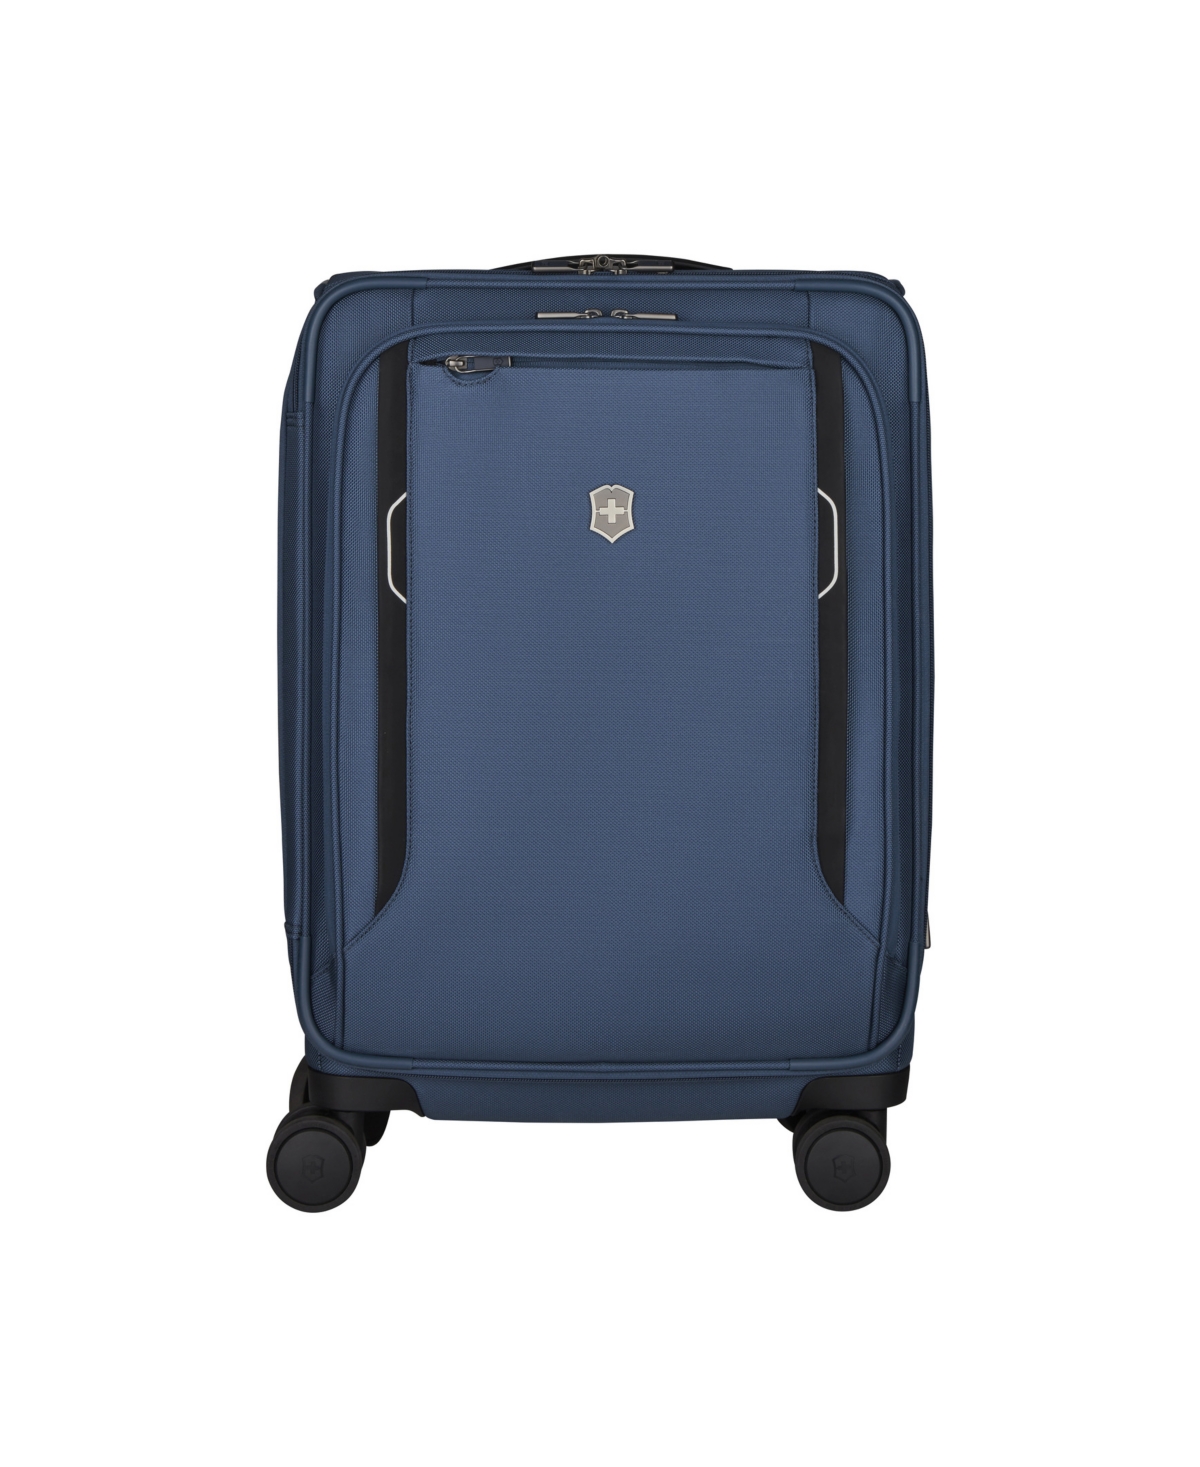 Werks 6.0 Frequent Flyer Plus 22.8" Carry-On Softside Suitcase - Blue